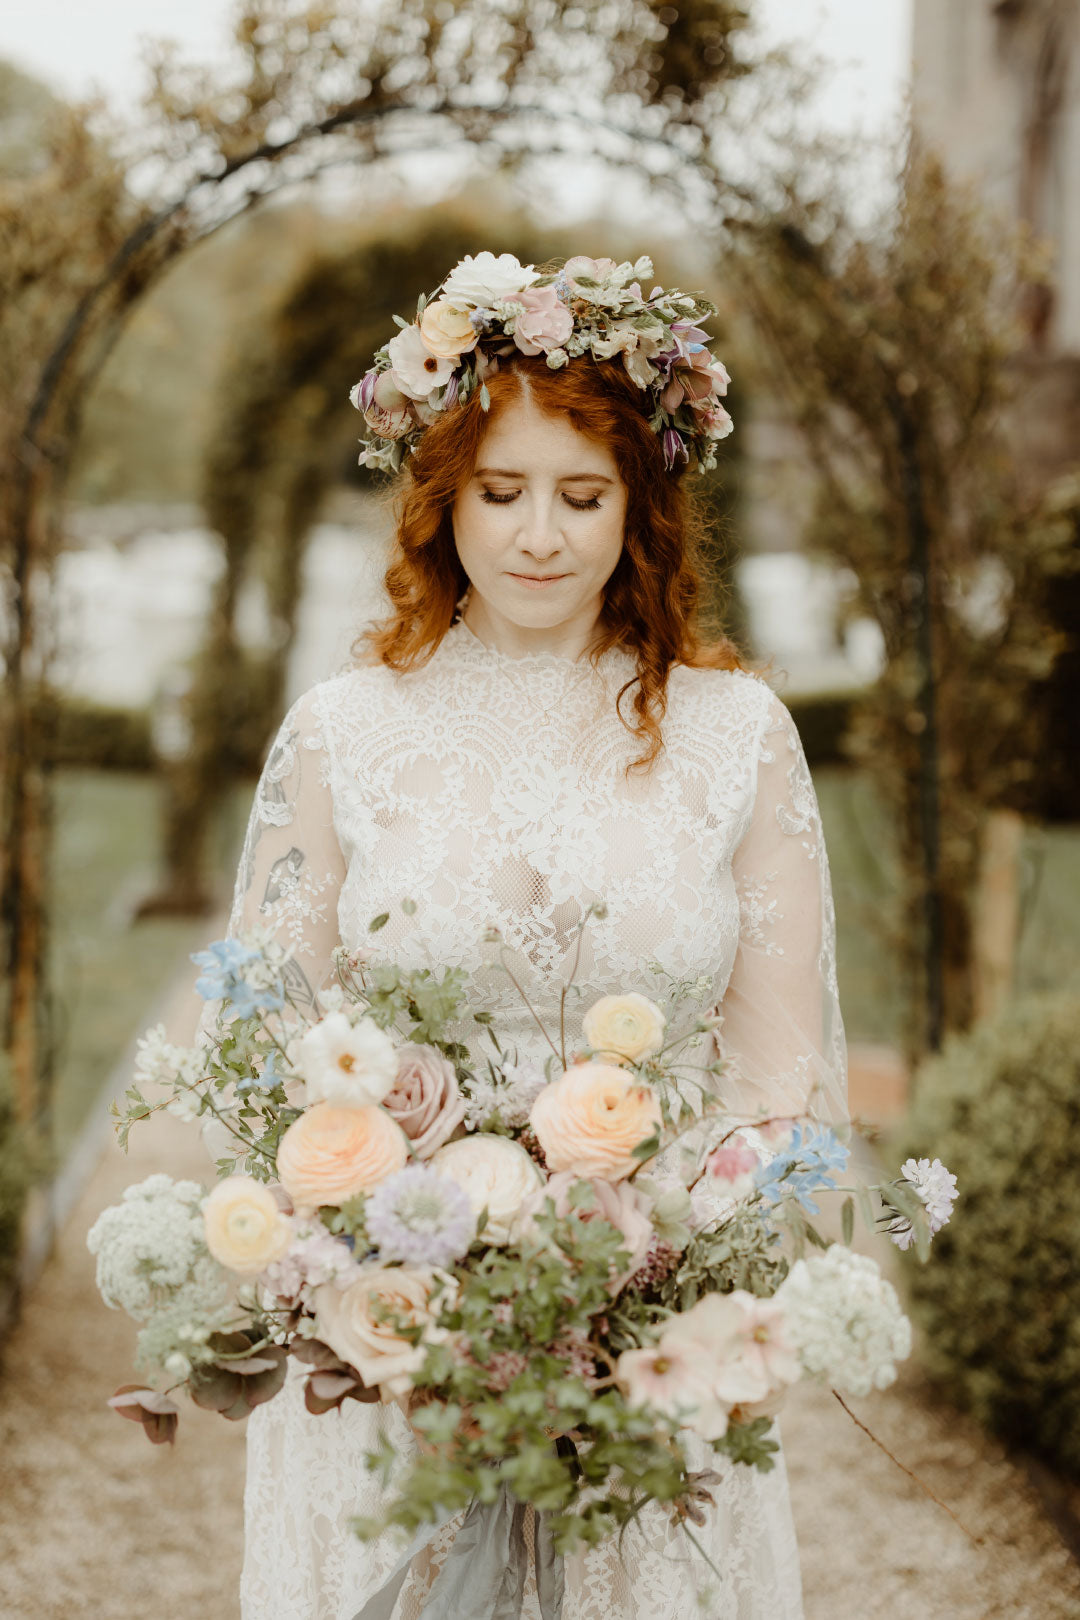 Bride with Floral crown holding wedding bouquet